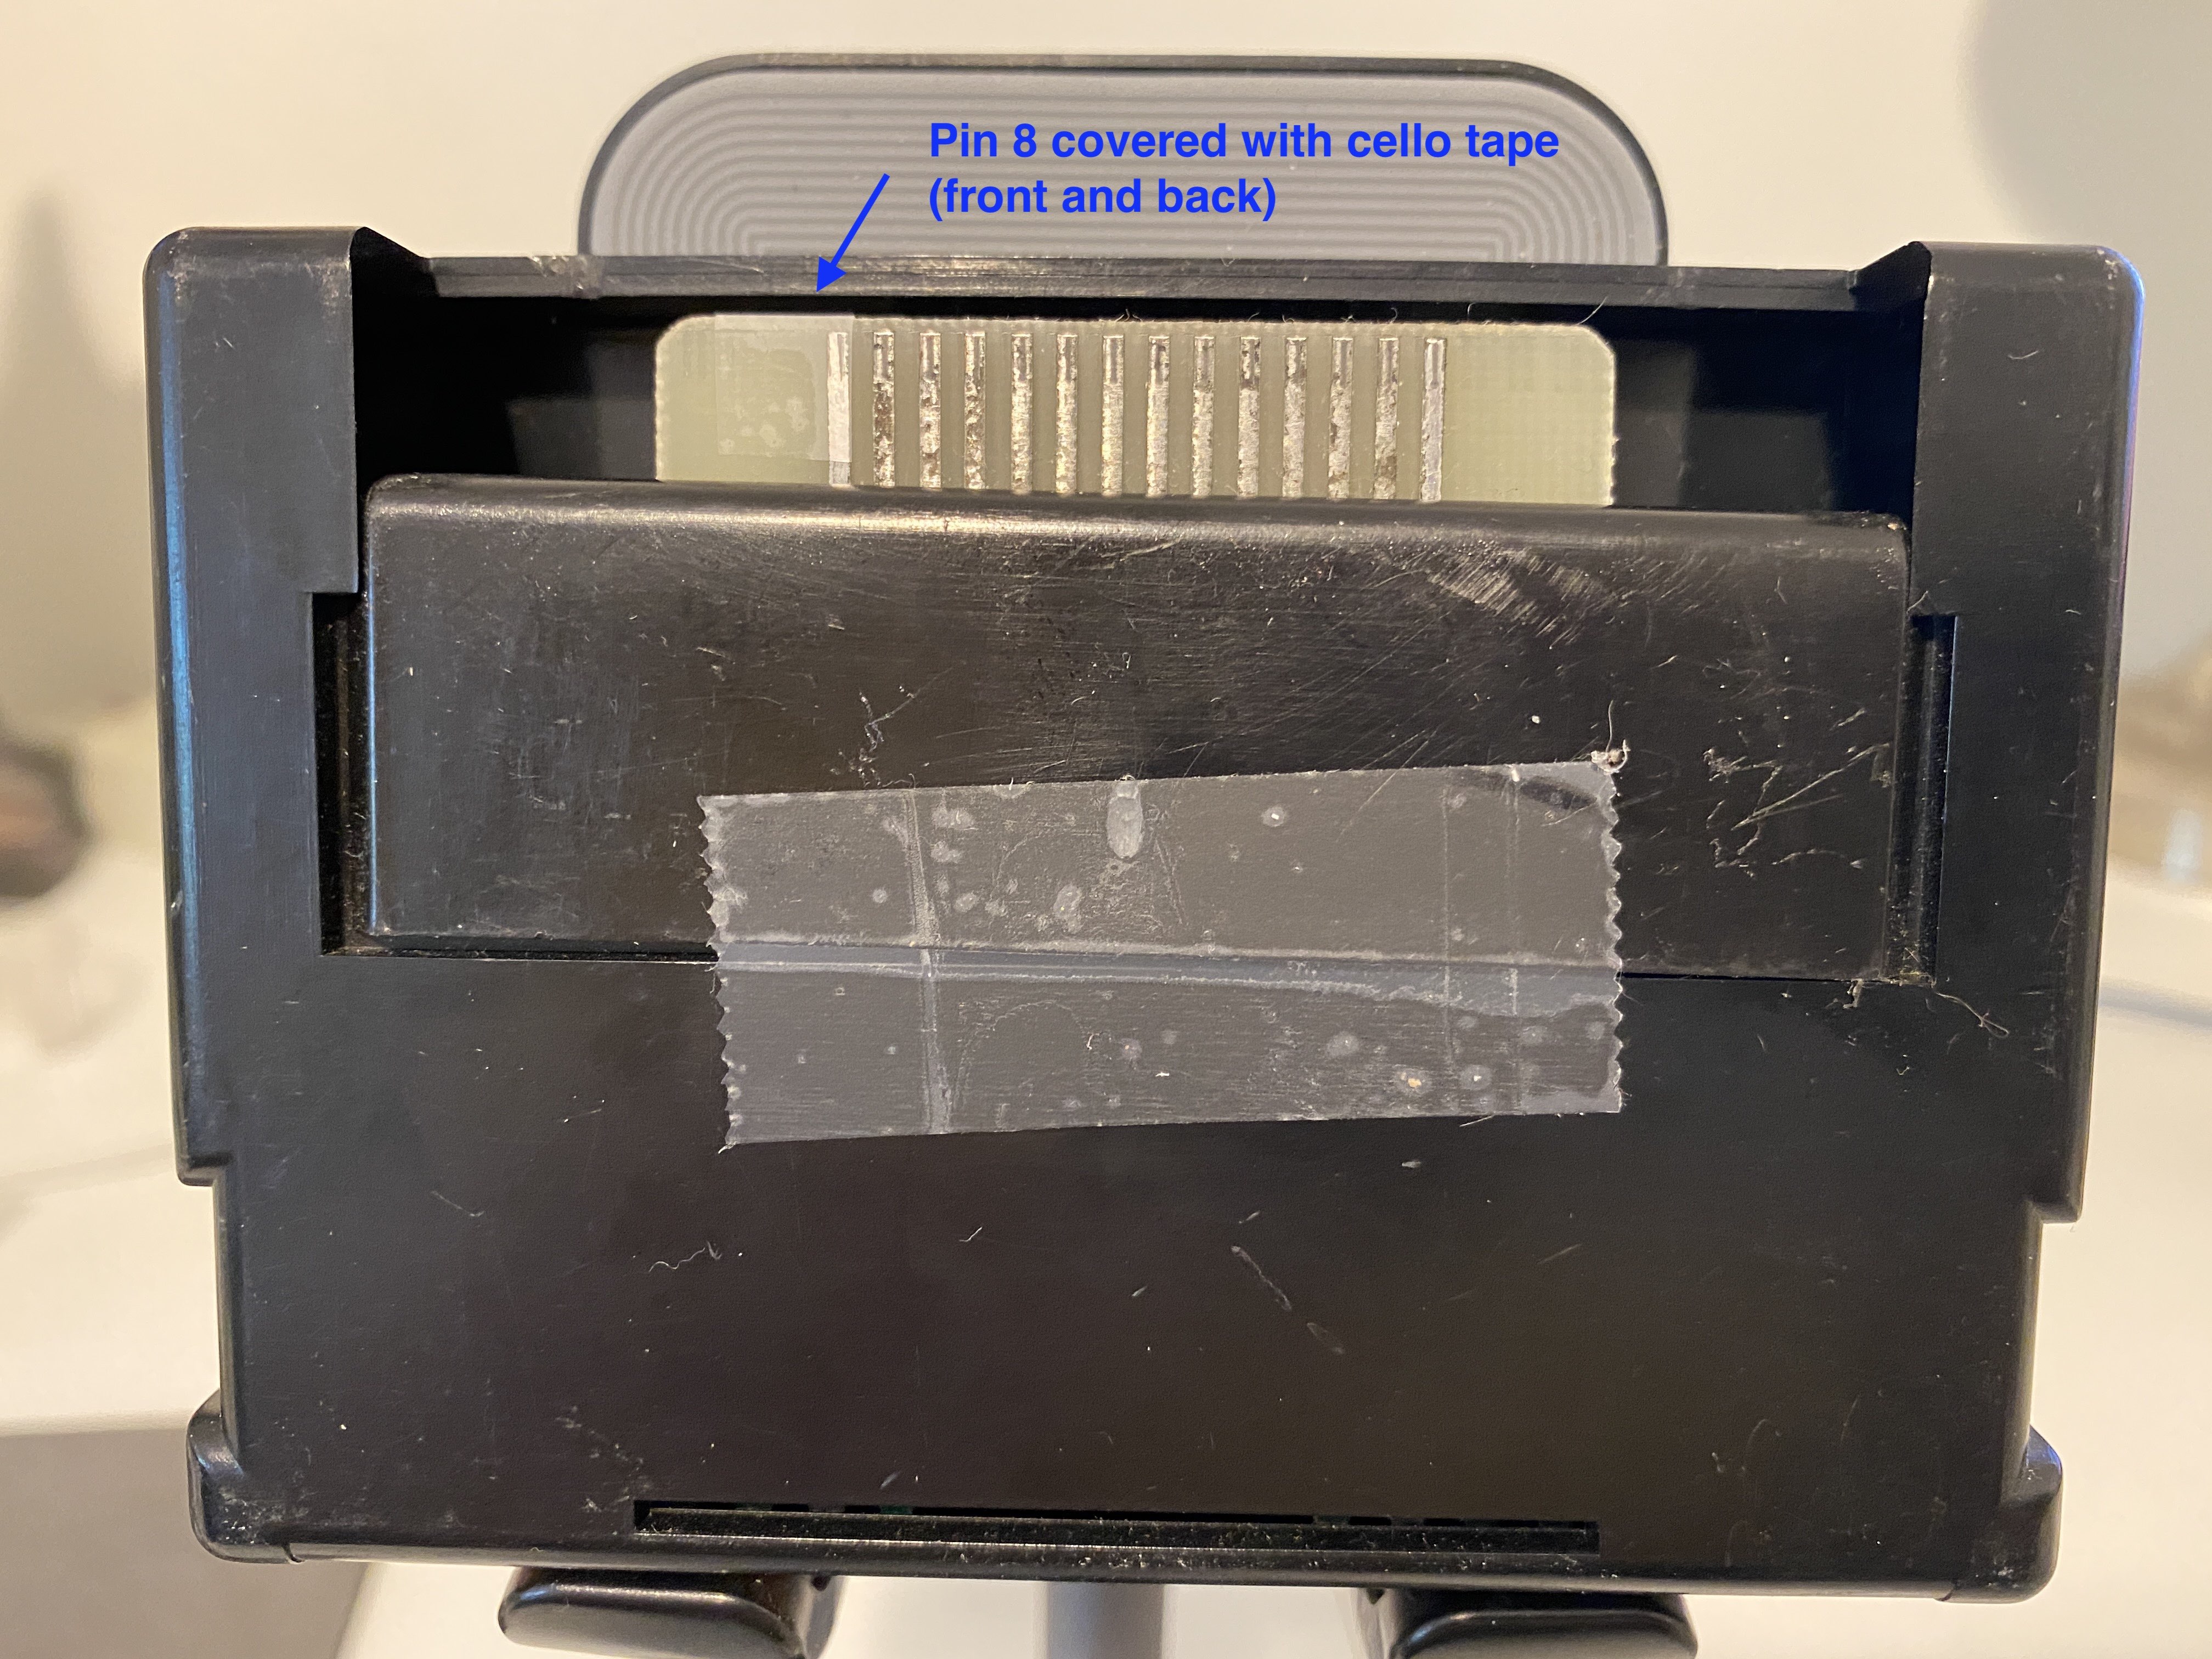 Tape over pin 8 of the cartridge port.